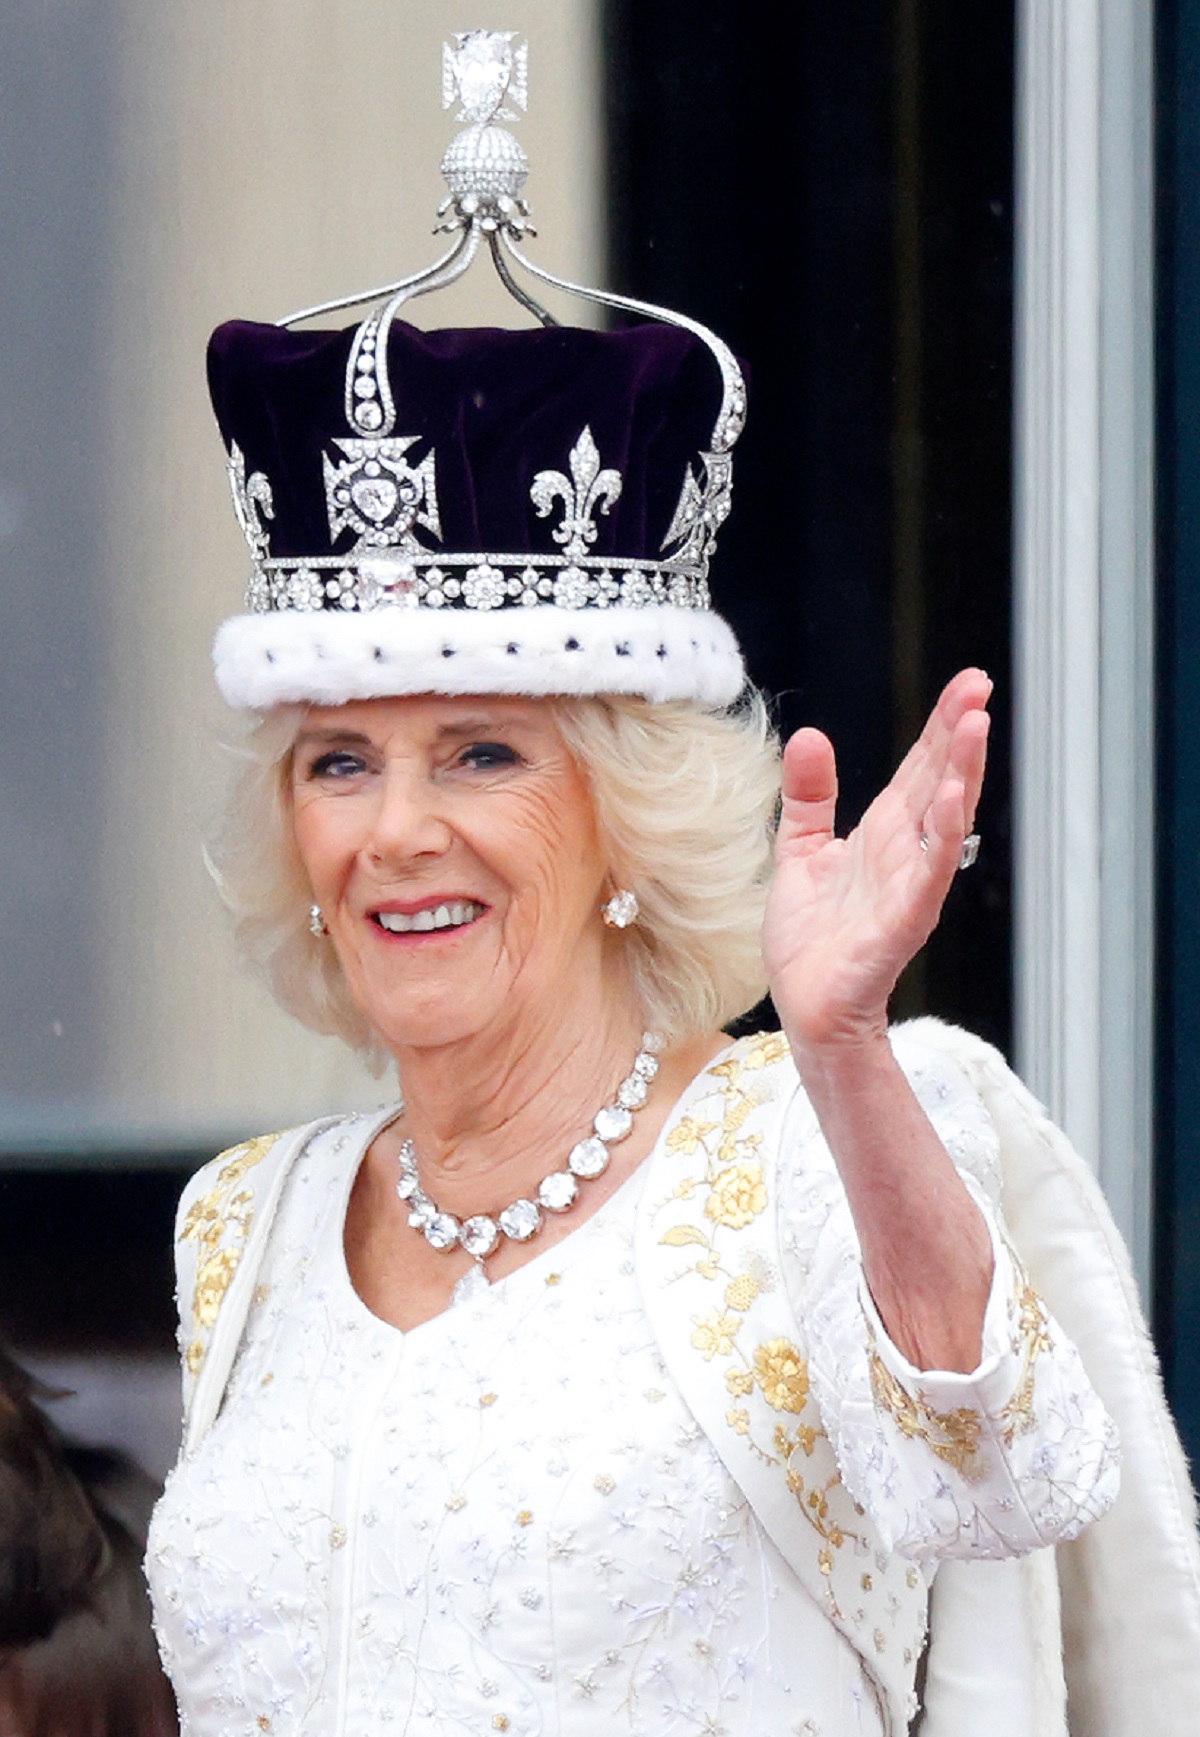 Camilla Parker Bowles waving from the balcony of Buckingham Palace following coronation in a Bruce Oldfield- designed gown